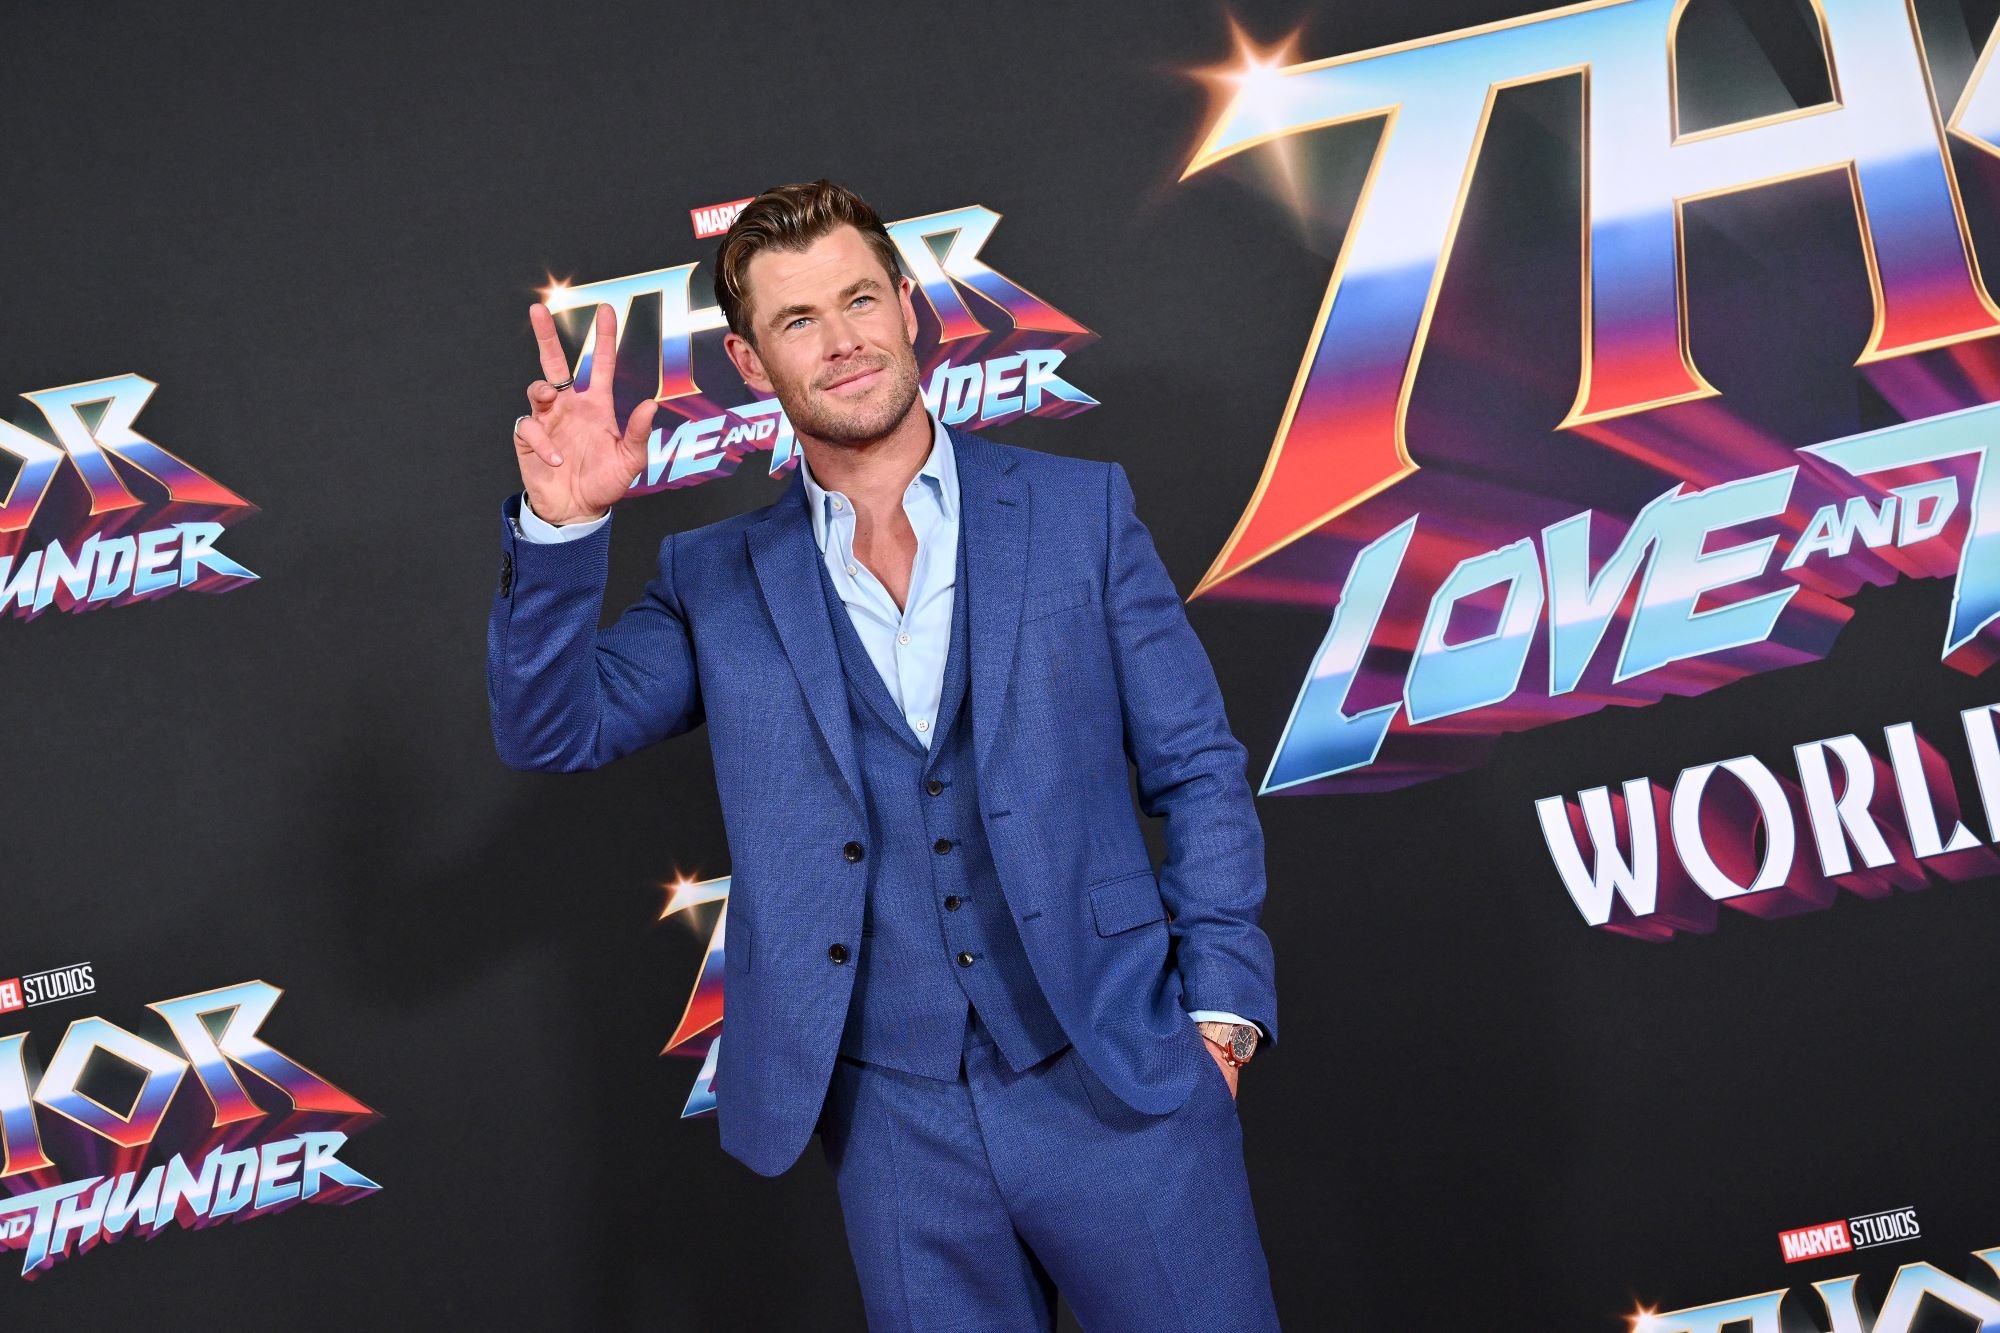 Chris Hemsworth attends the 'Thor: Love and Thunder' premiere